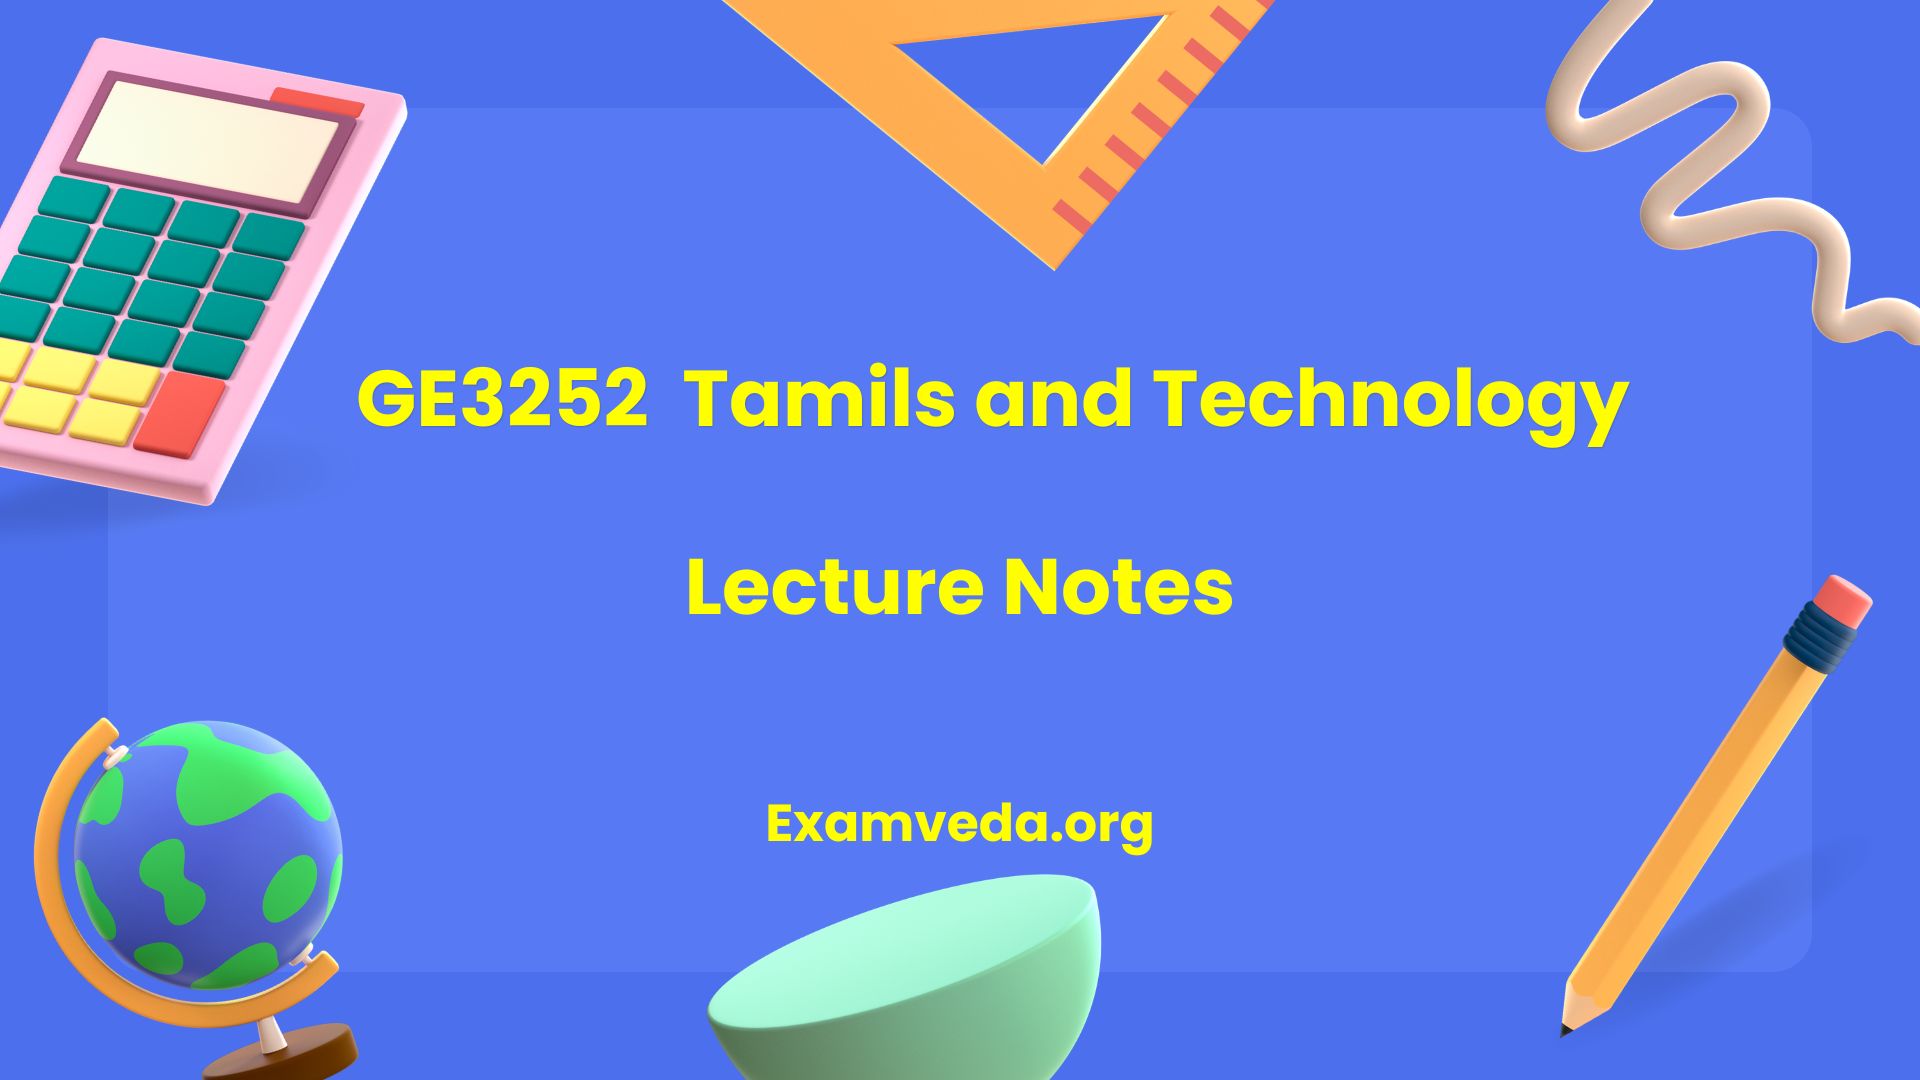 GE3252 தமிழரும் தொழில்நுட்பமும் Tamils and Technology Lecture Notes